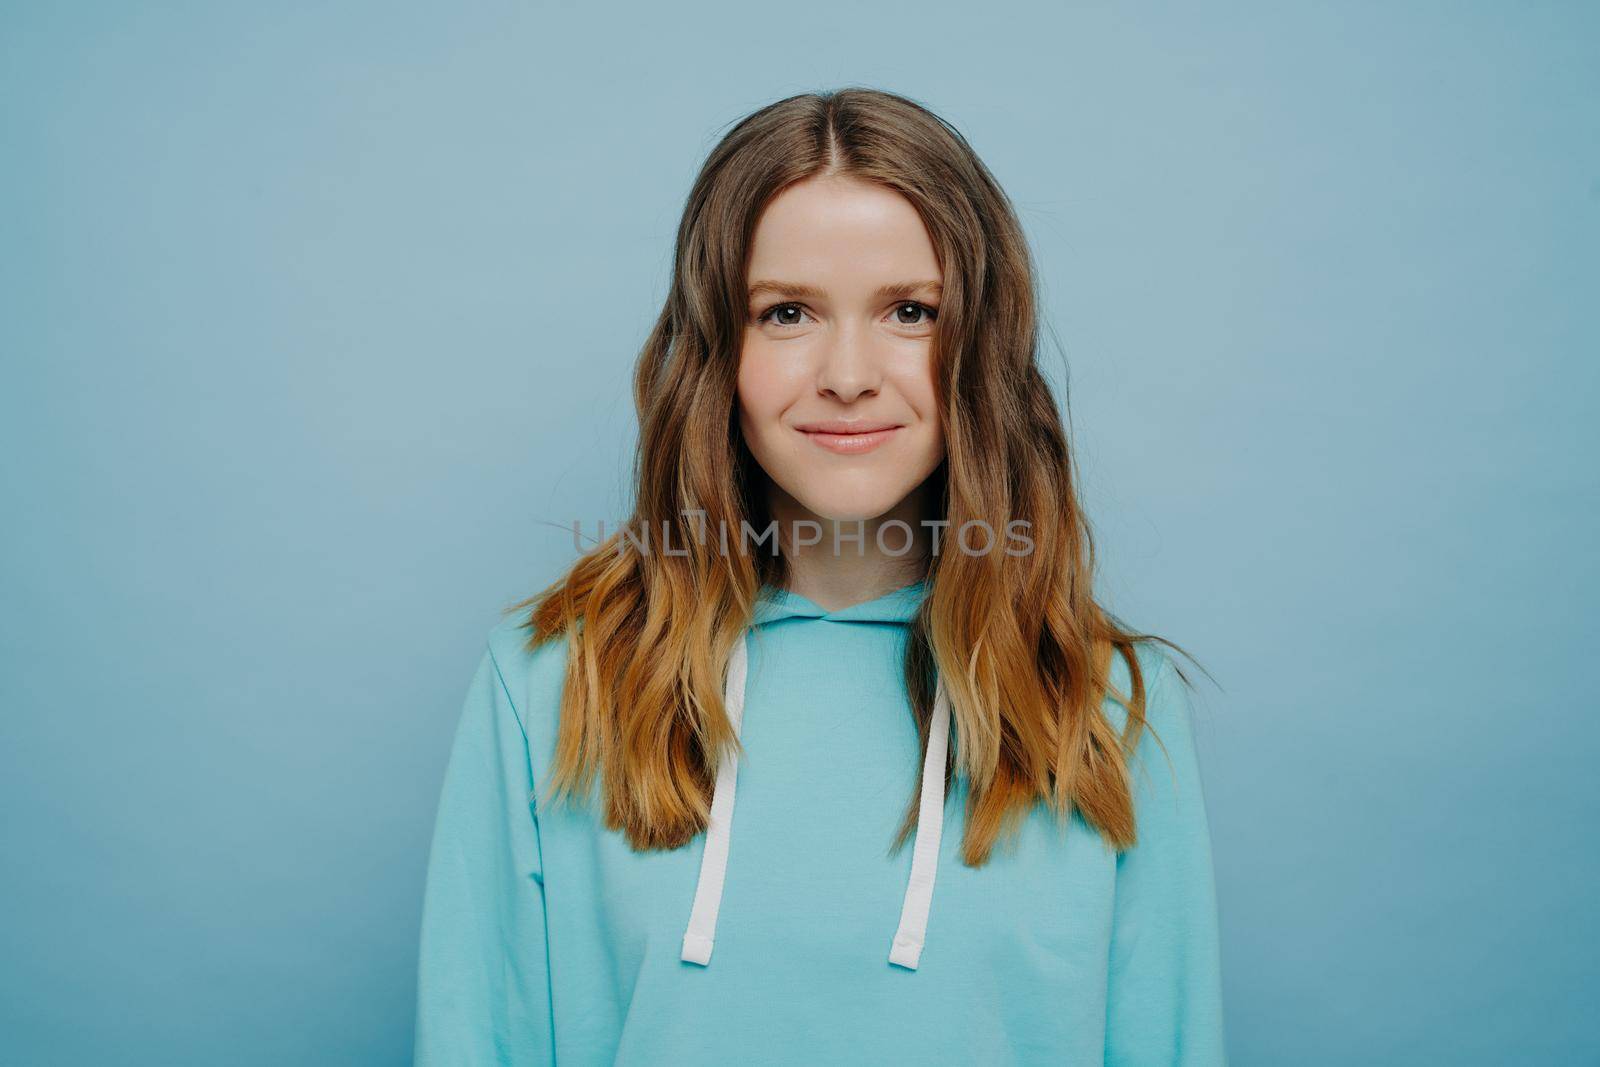 Young attractive girl with wavy ombre hairstyle smiling while looking at camera in comfortable casual hooded sweatshirt standing against light blue background. Medium shot